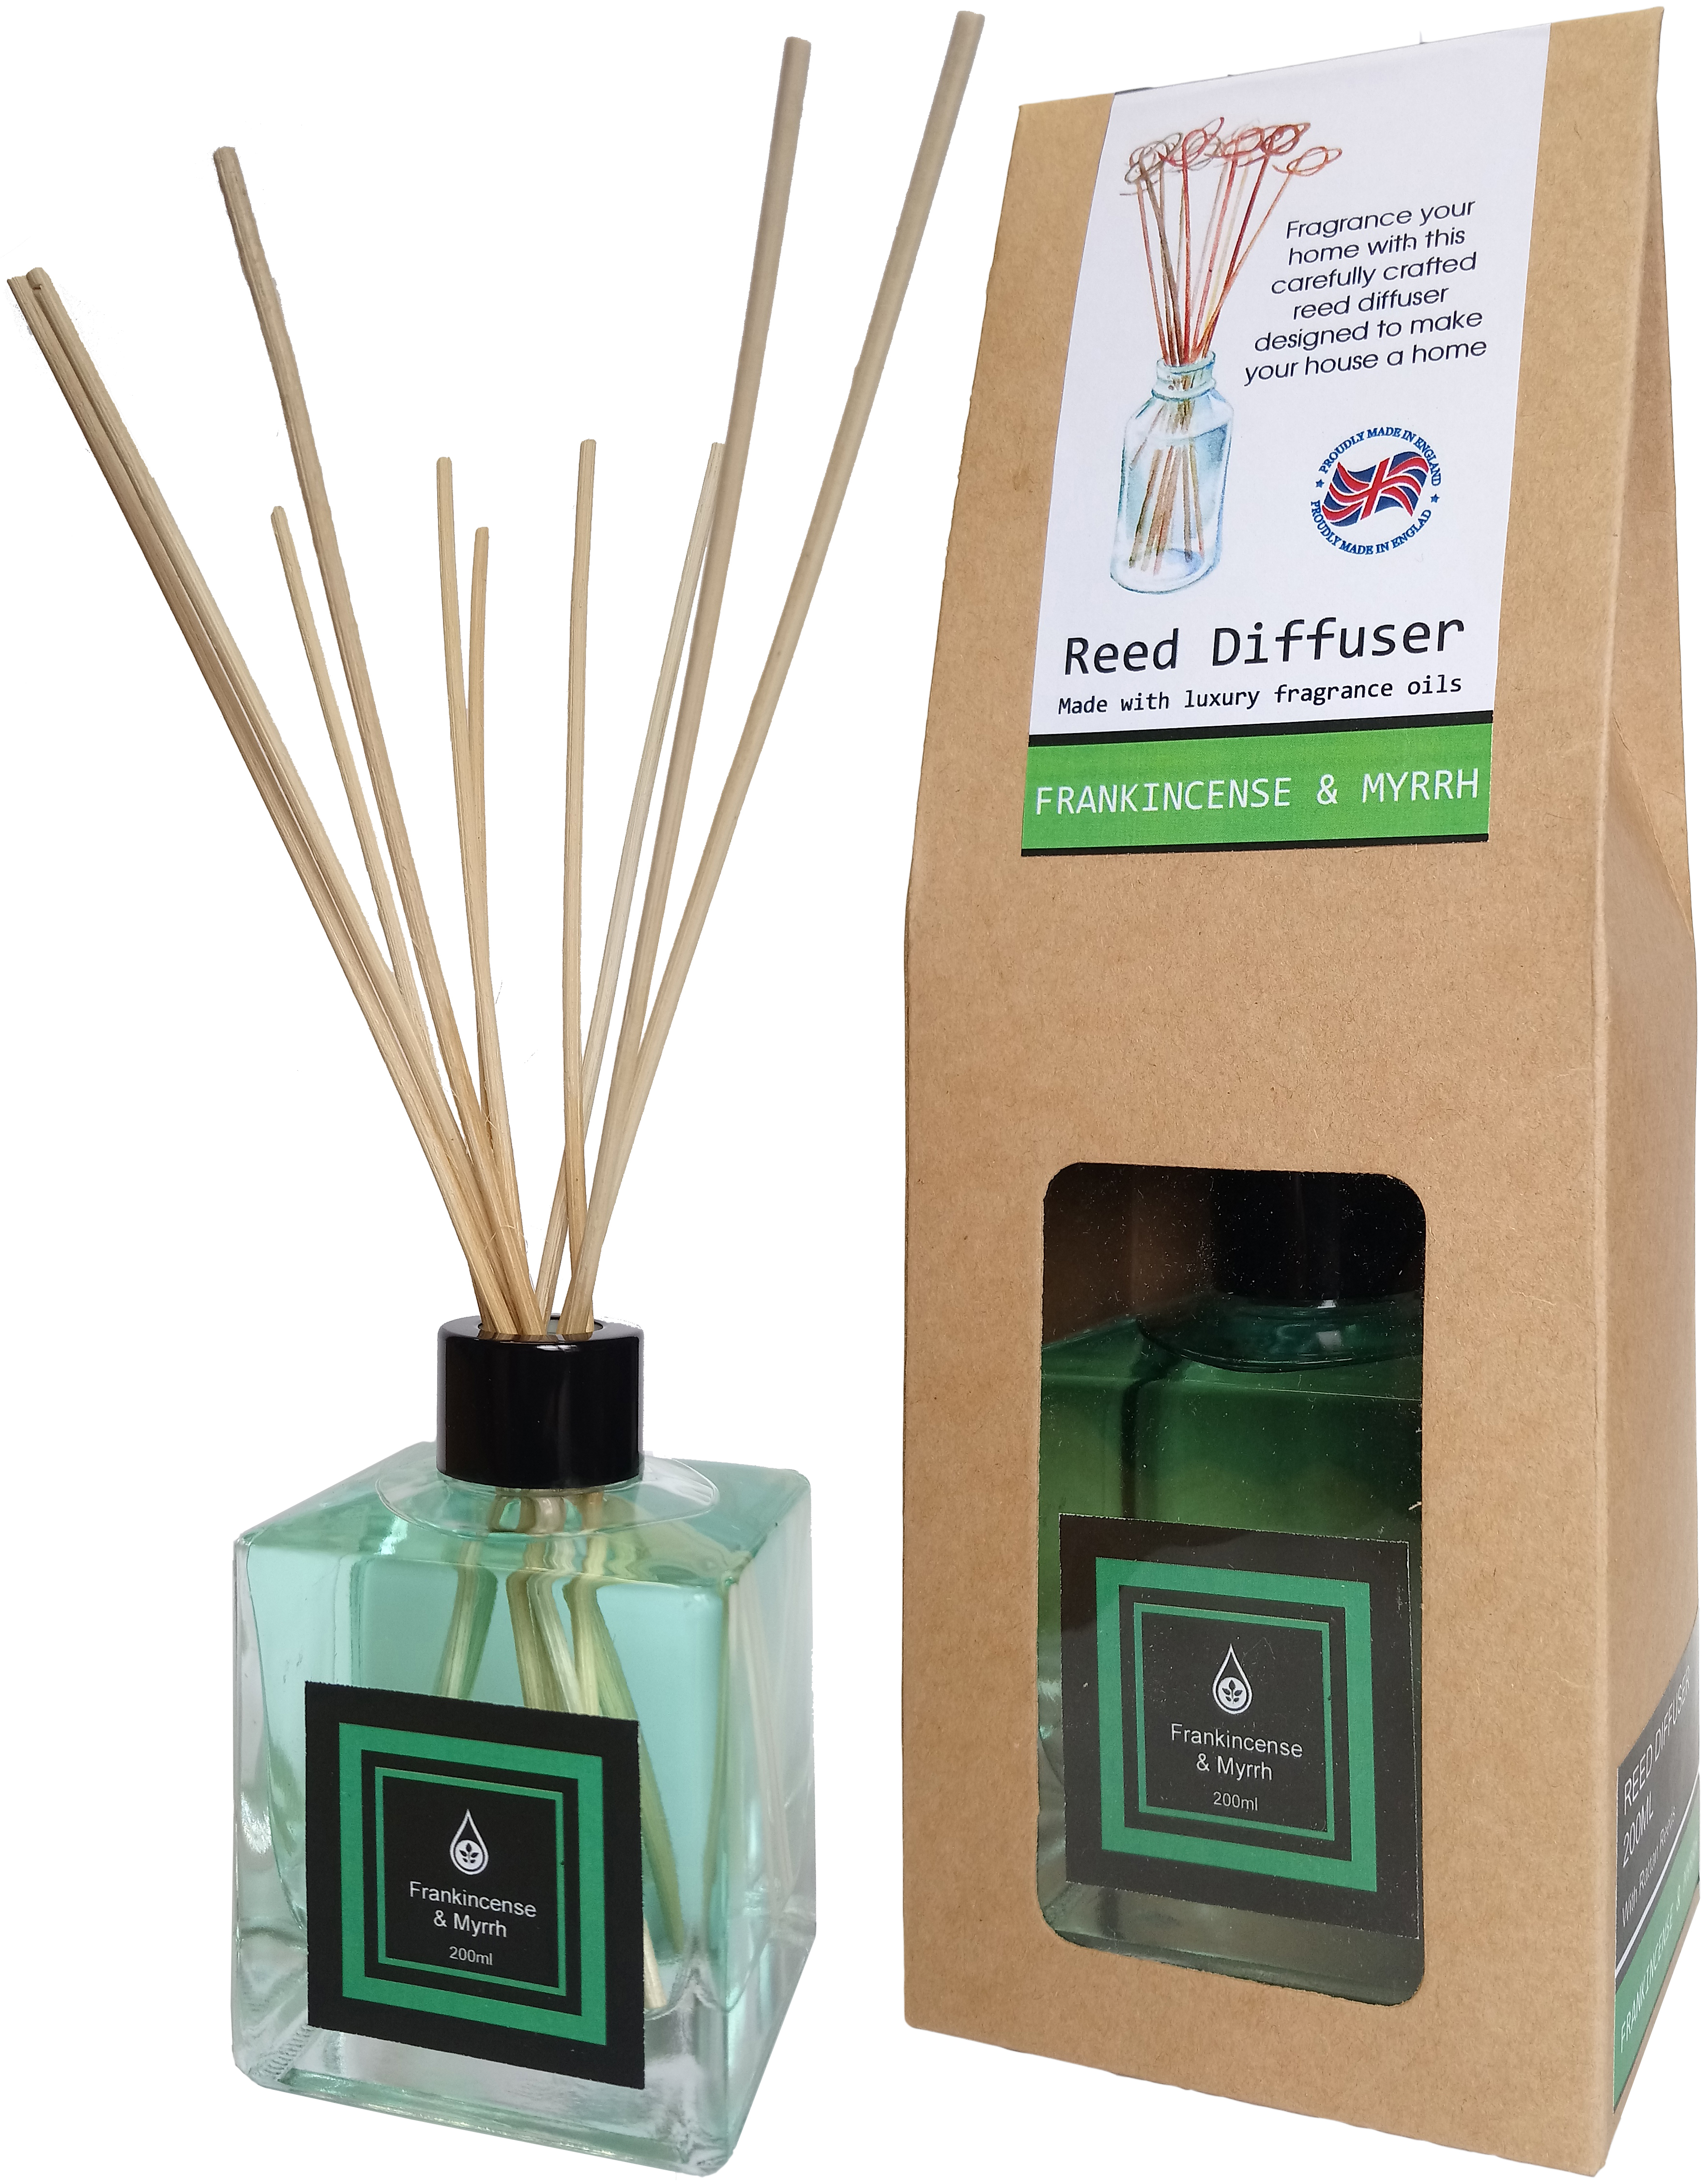 Frankincense & Myrrh Home Fragrance Reed Diffuser - 200ml With Reeds